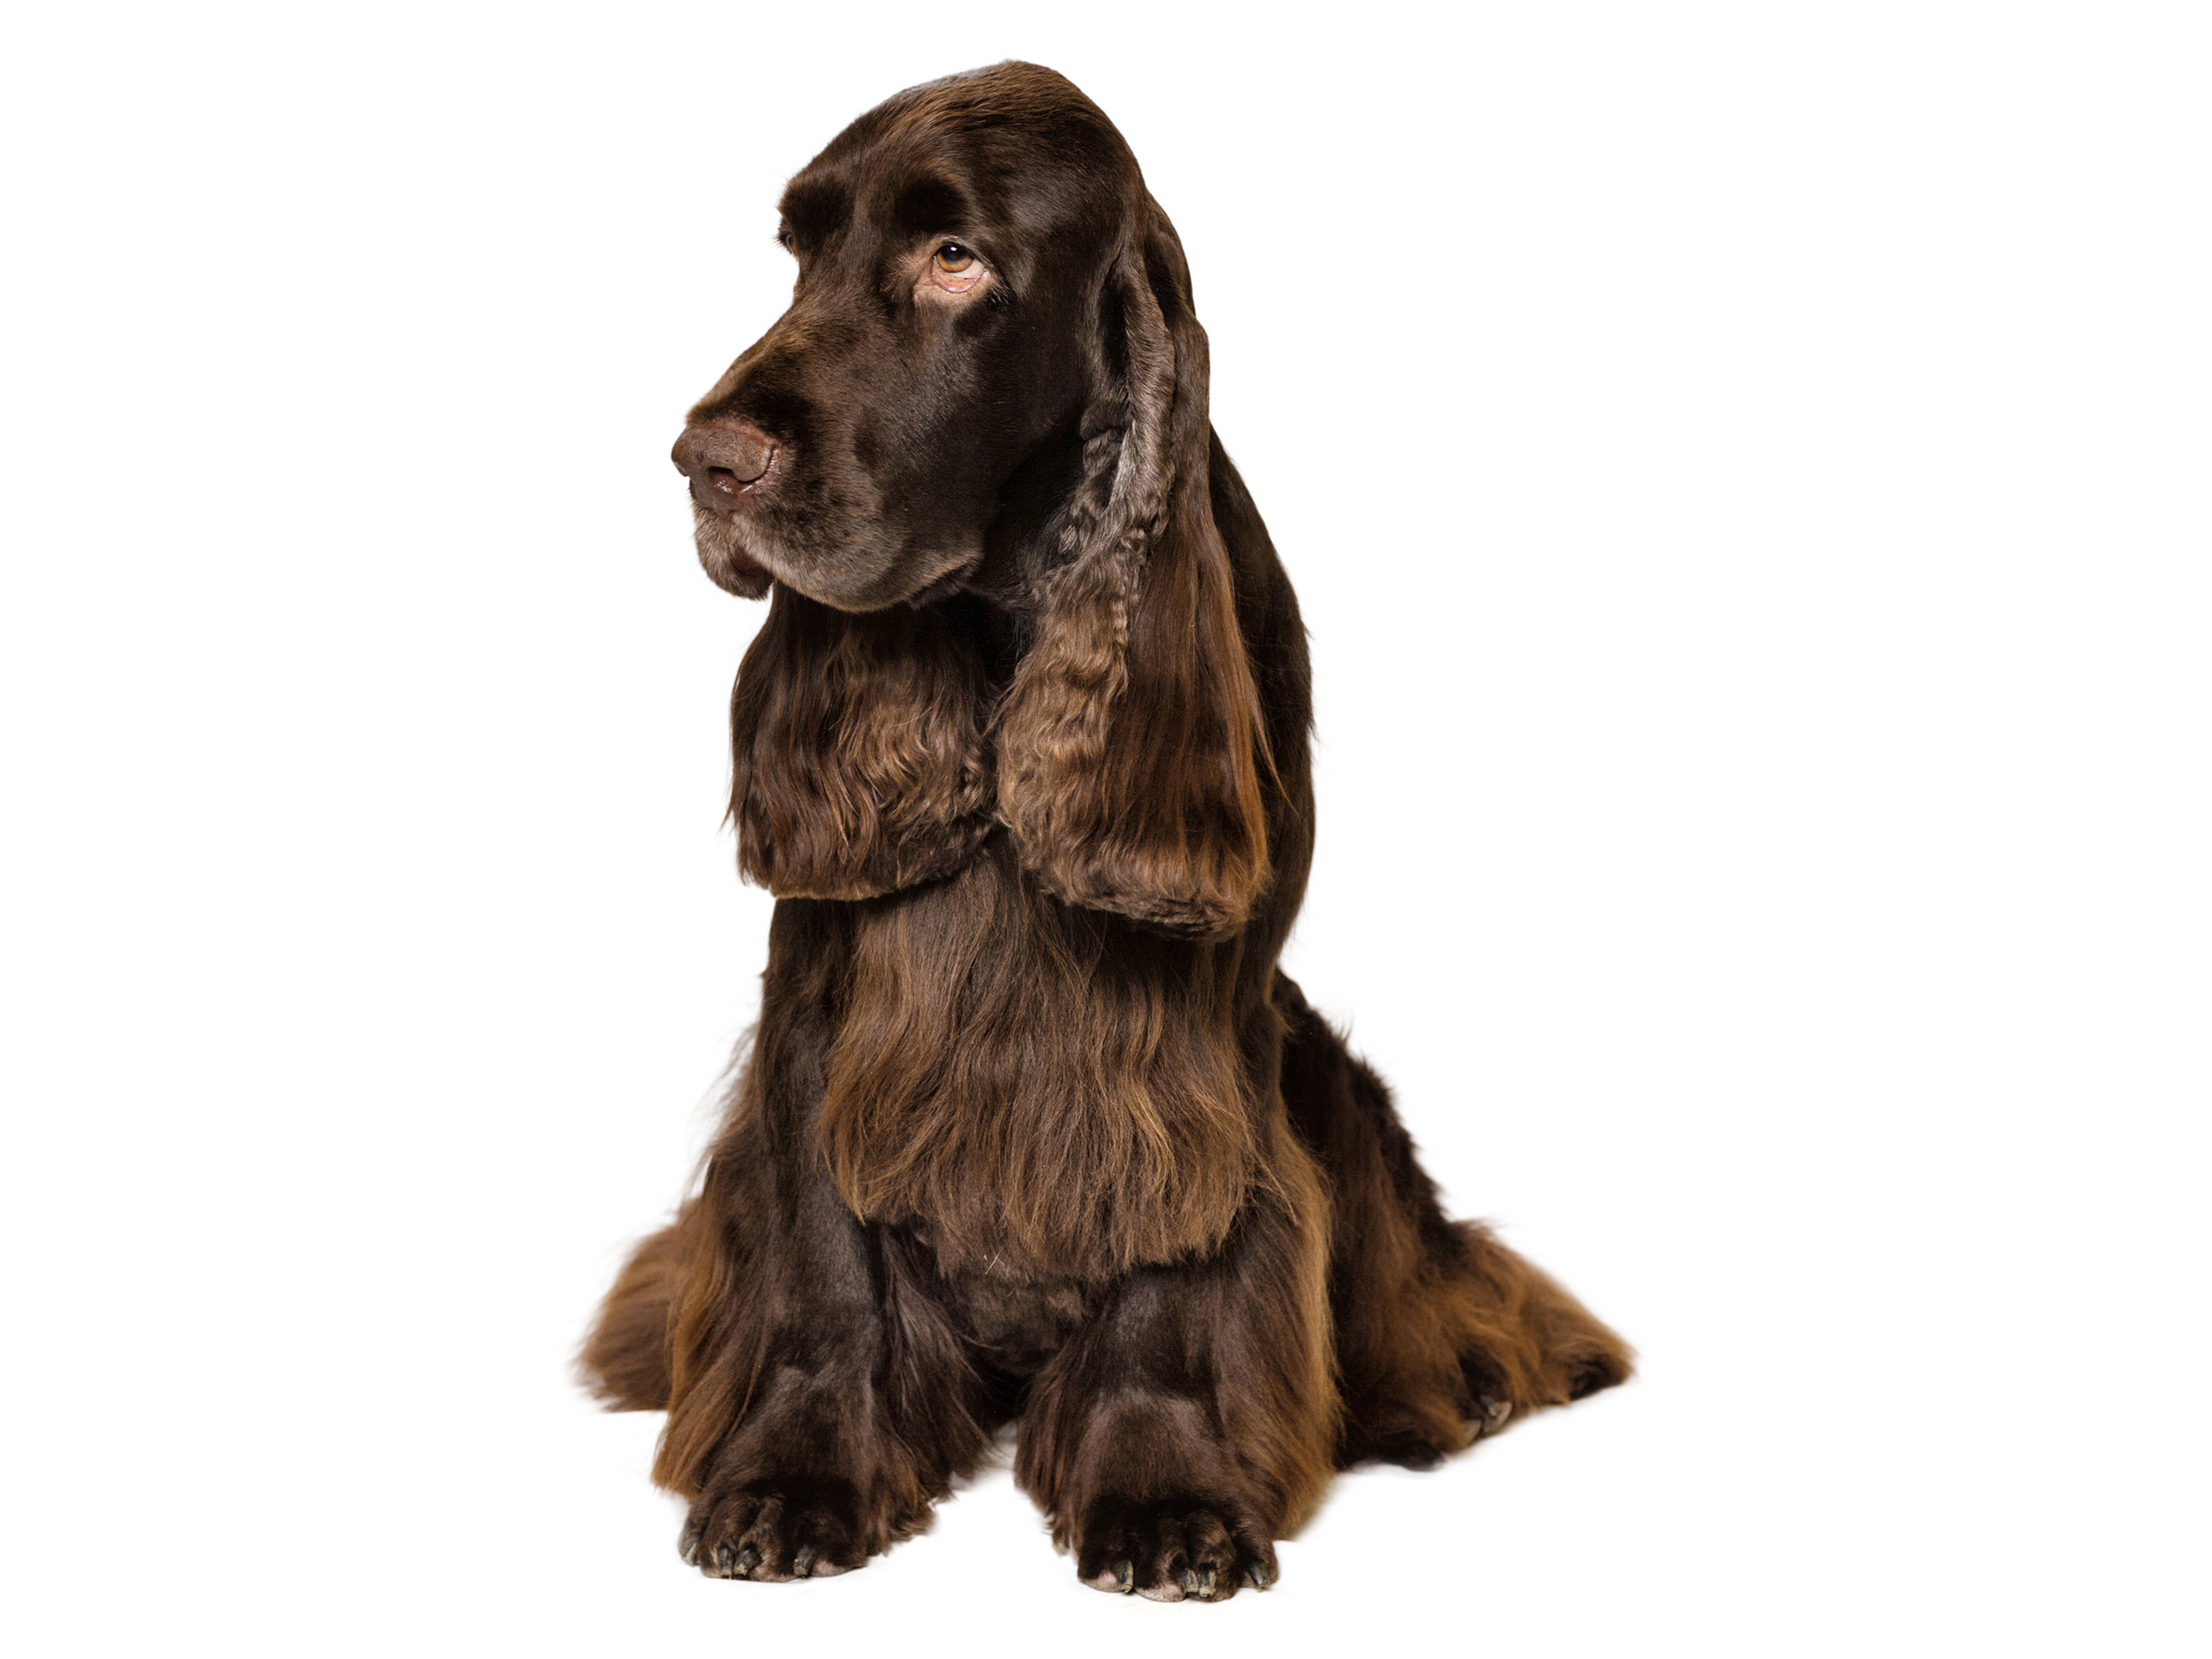 Field spaniel adult black and white